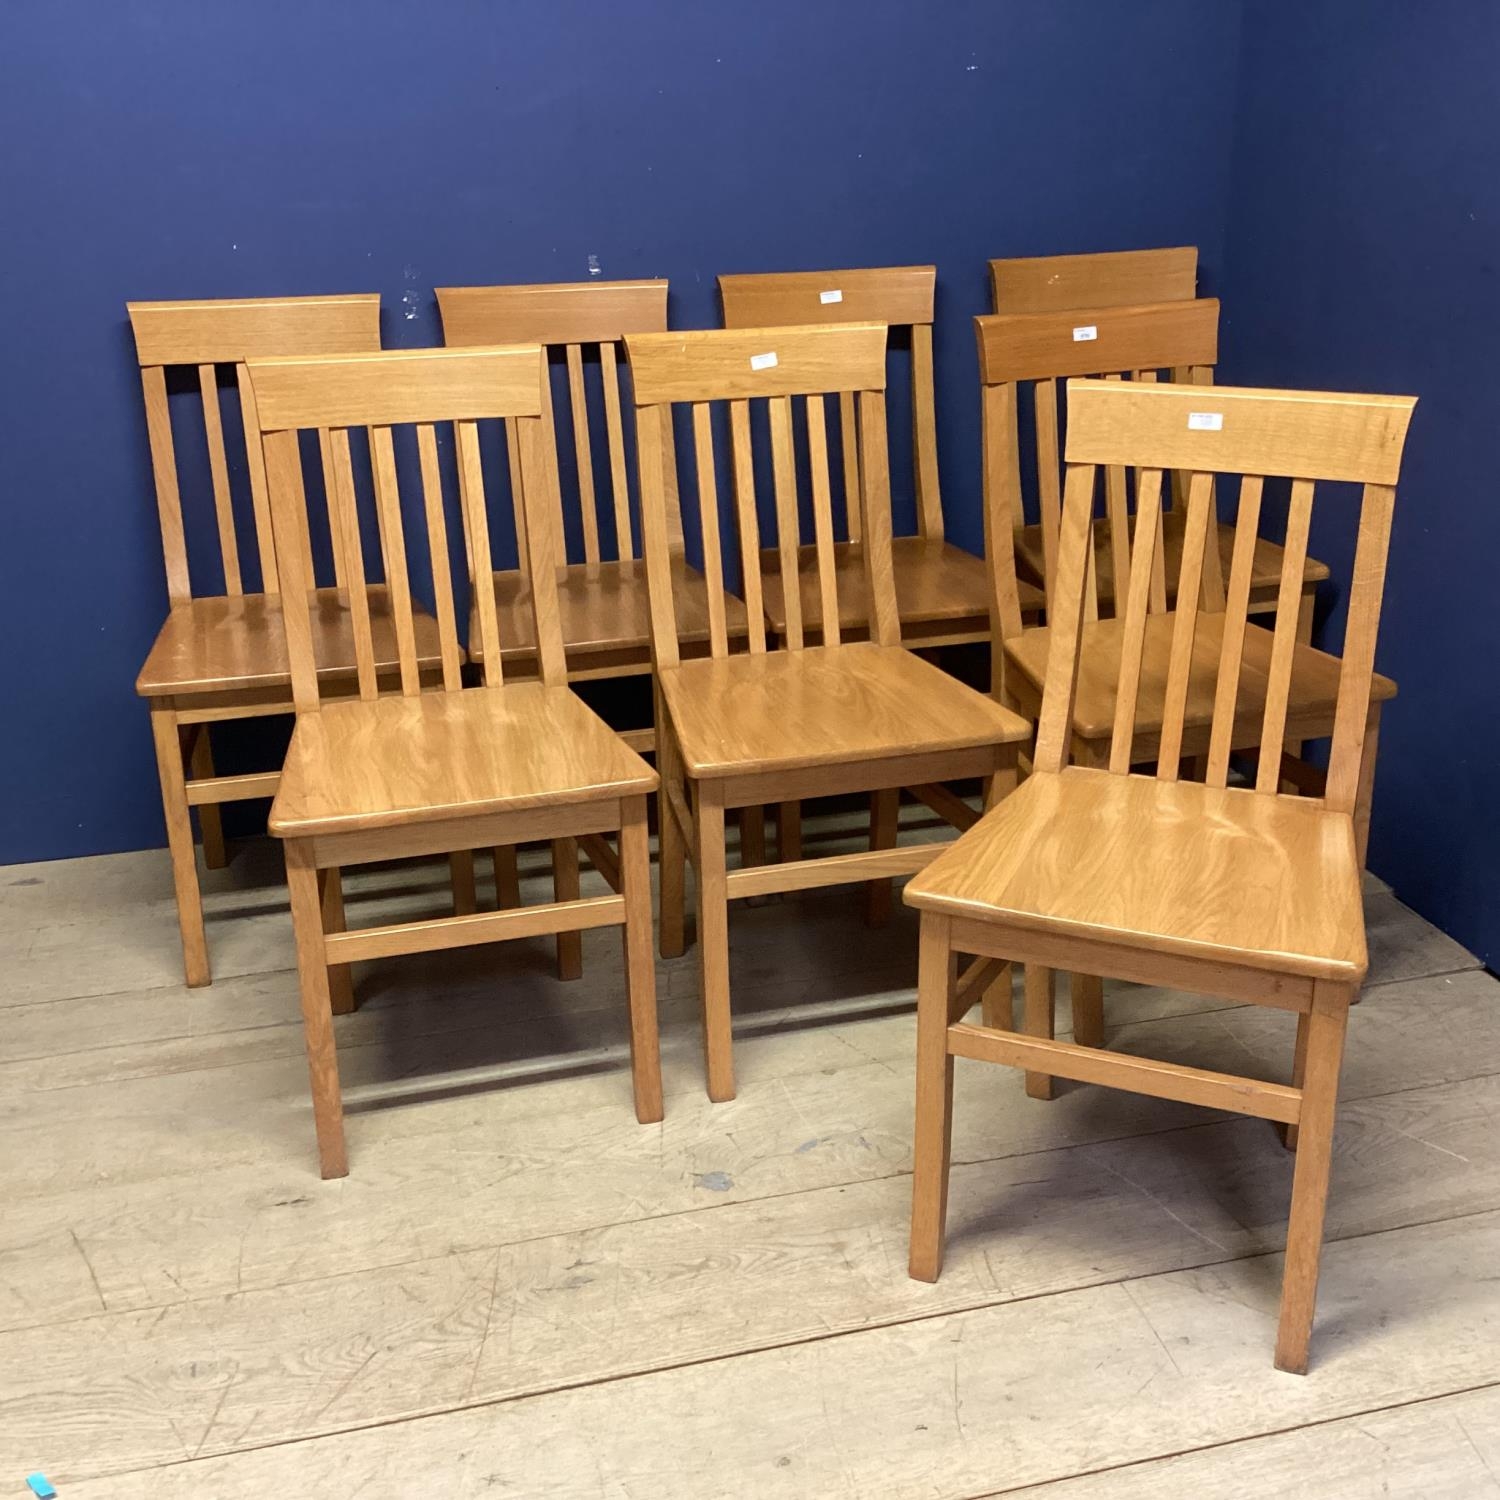 Set of 8 modern kitchen chairs with slat backs and shaped seats - Image 2 of 2